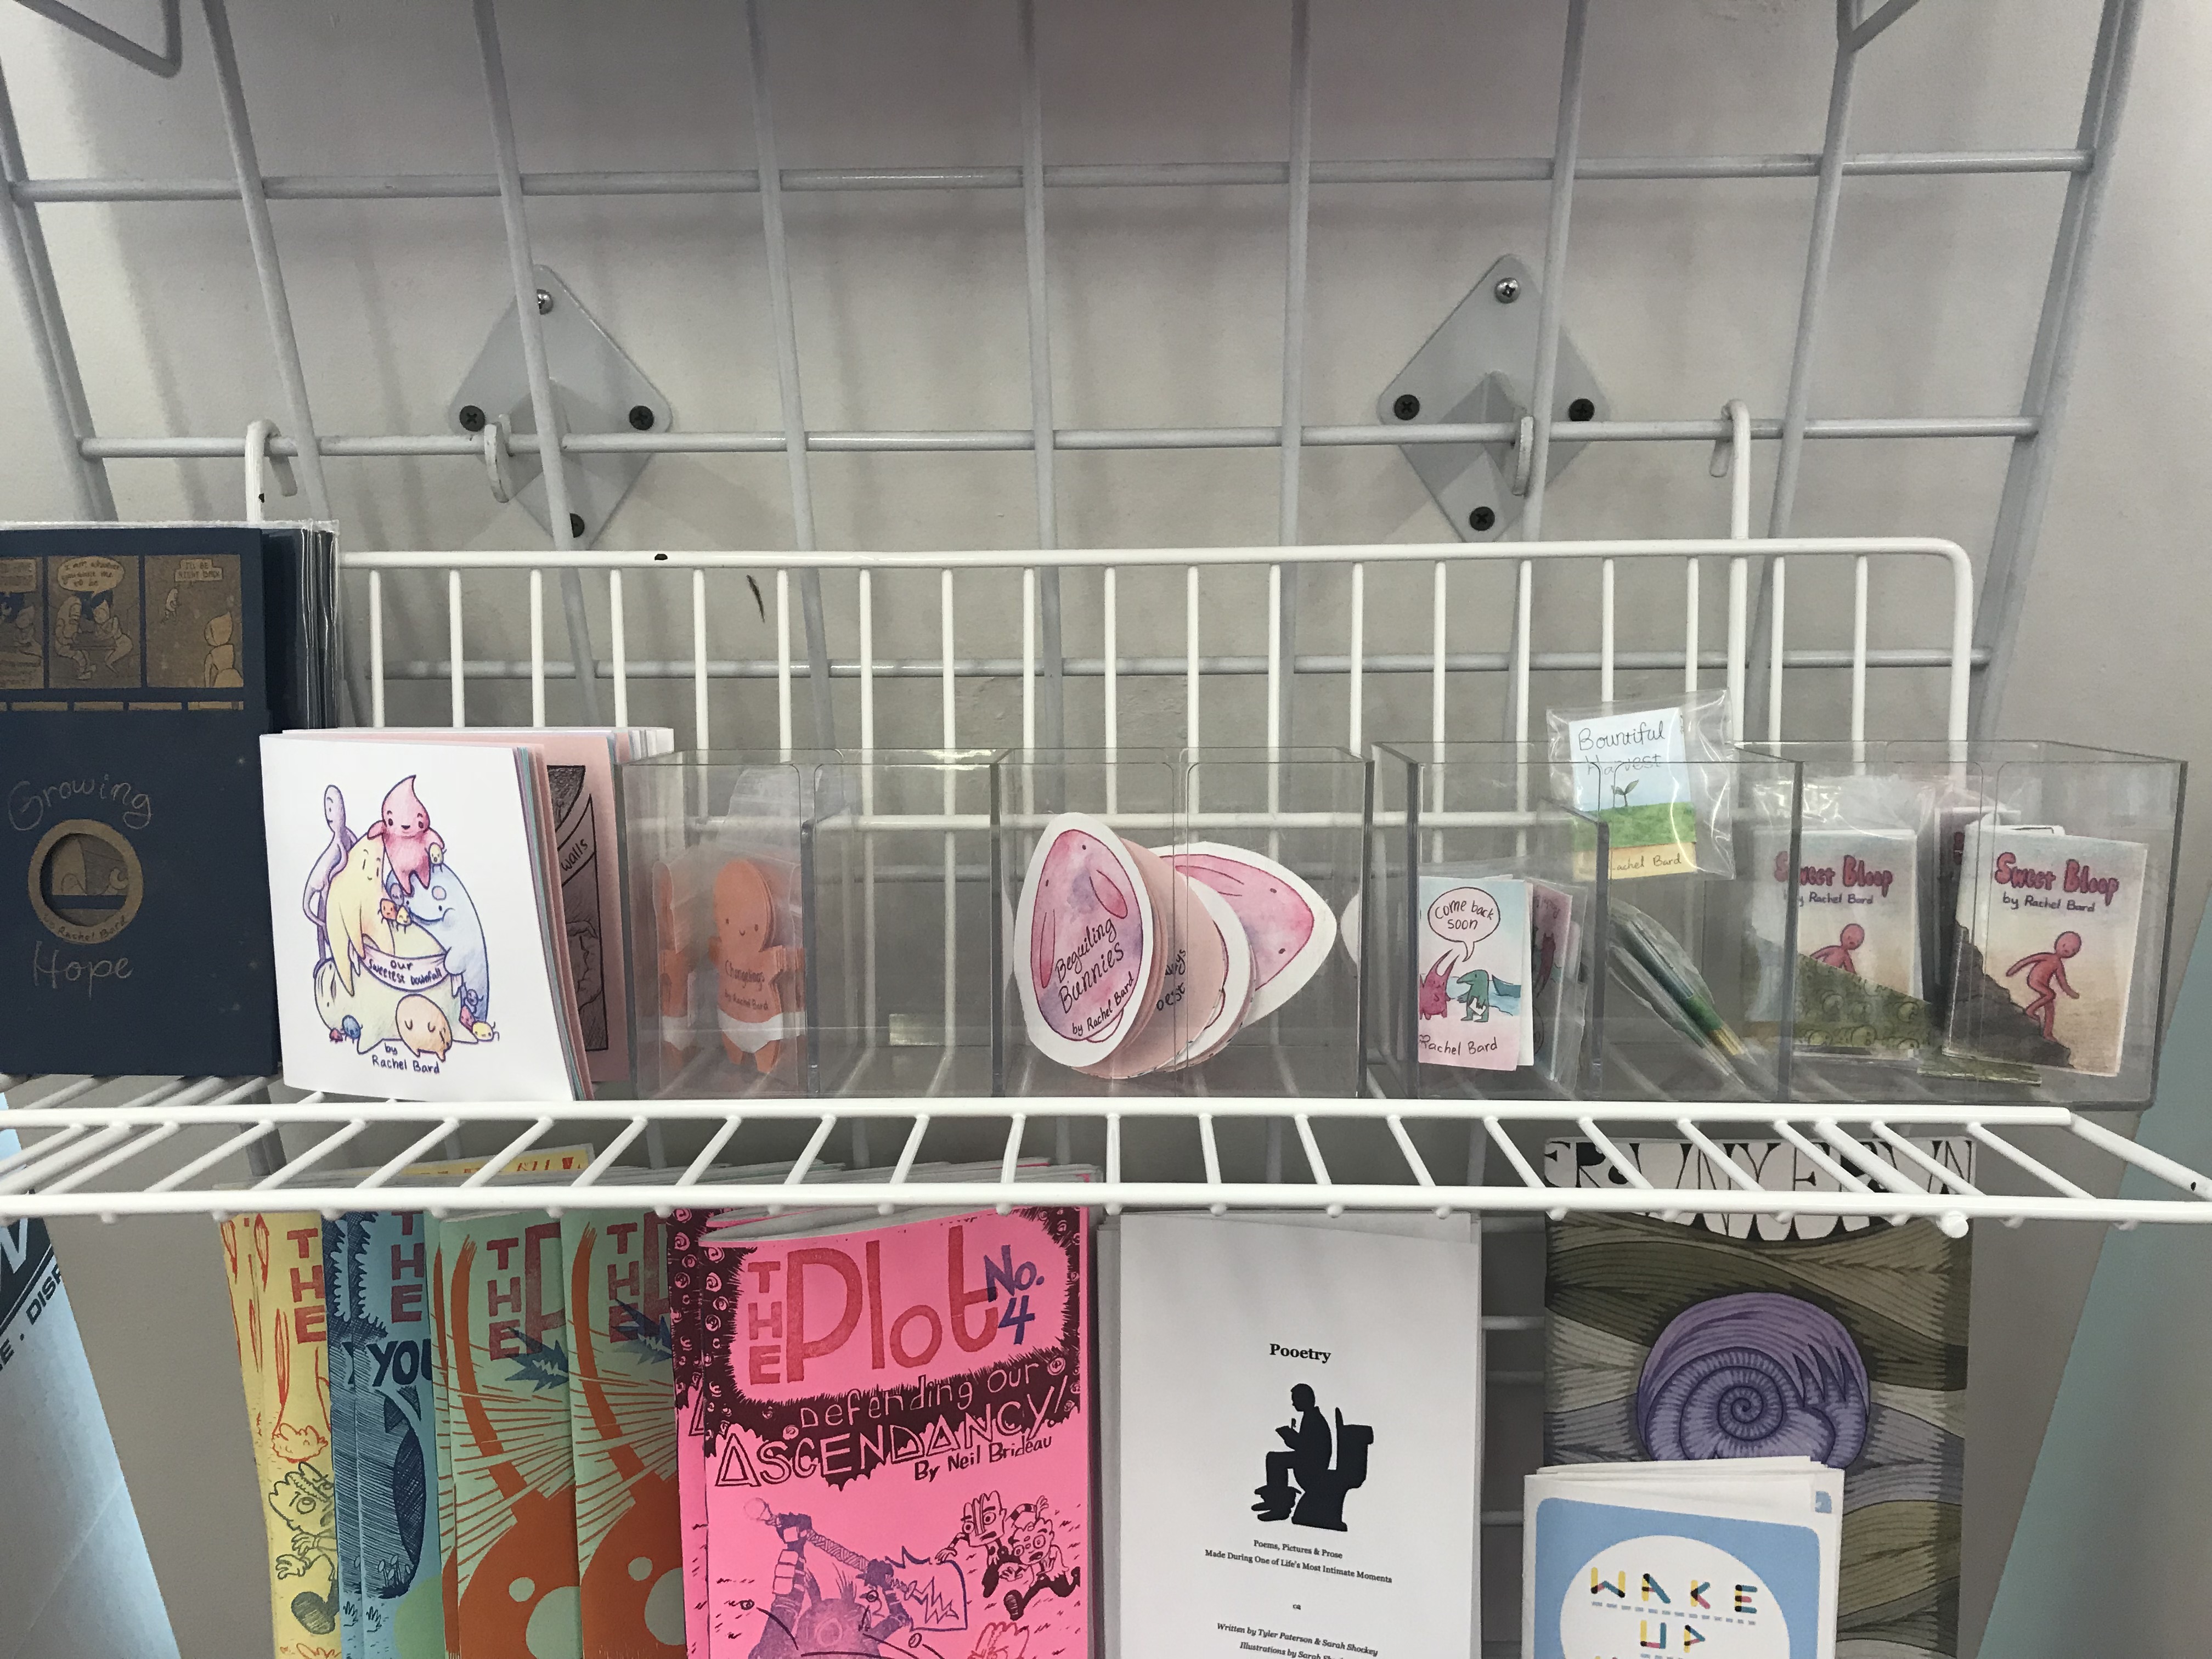 Small zines and comics from Rachel Bard on display. Most include cutesy drawings of rabbits, babies and other blobbish critters